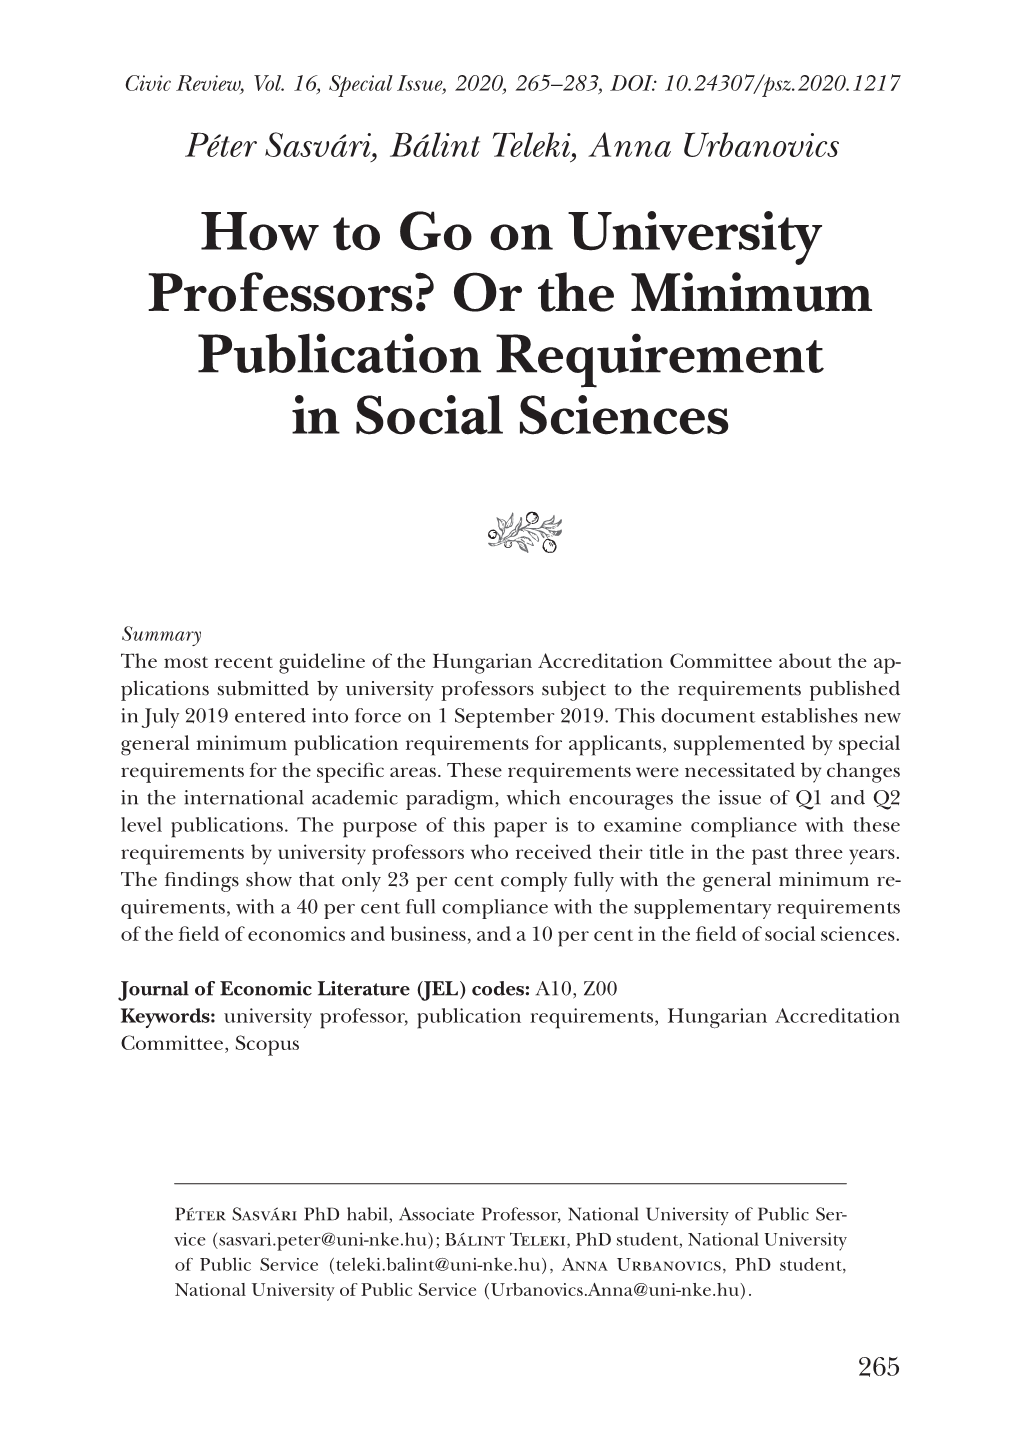 How to Go on University Professors? Or the Minimum Publication Requirement in Social Sciences